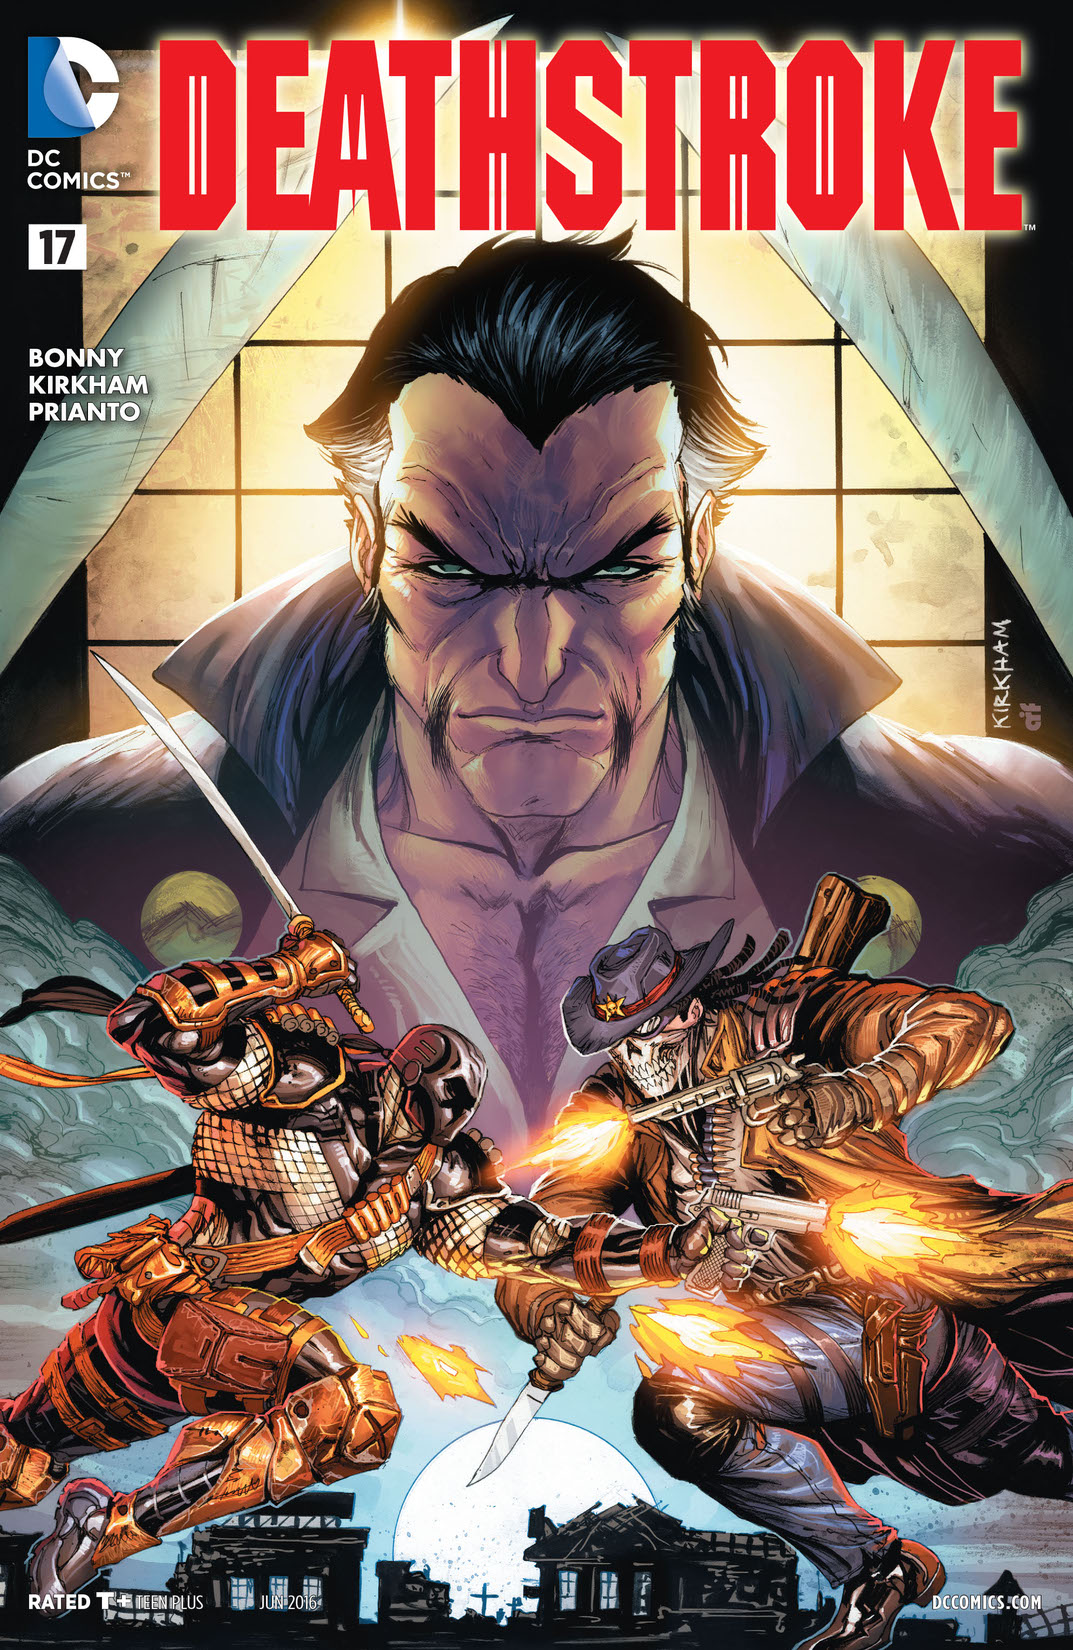 Deathstroke (2014-) #17 preview images